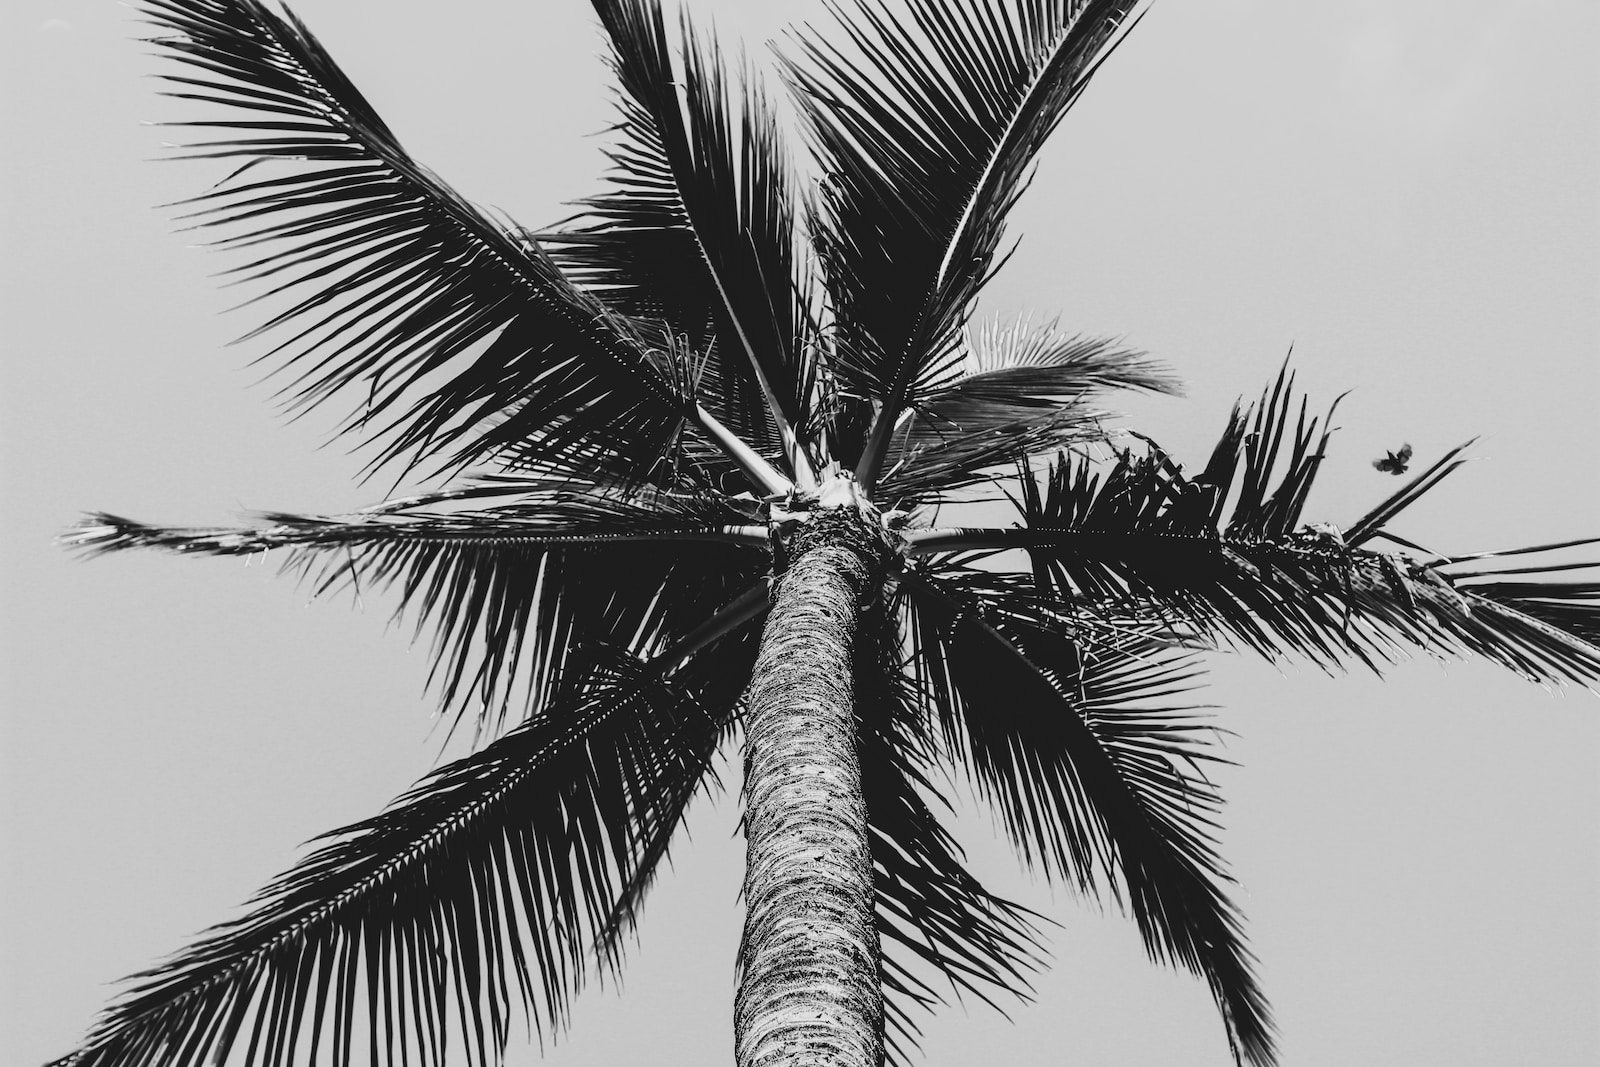 grayscale low angle photography of coconut palm tree